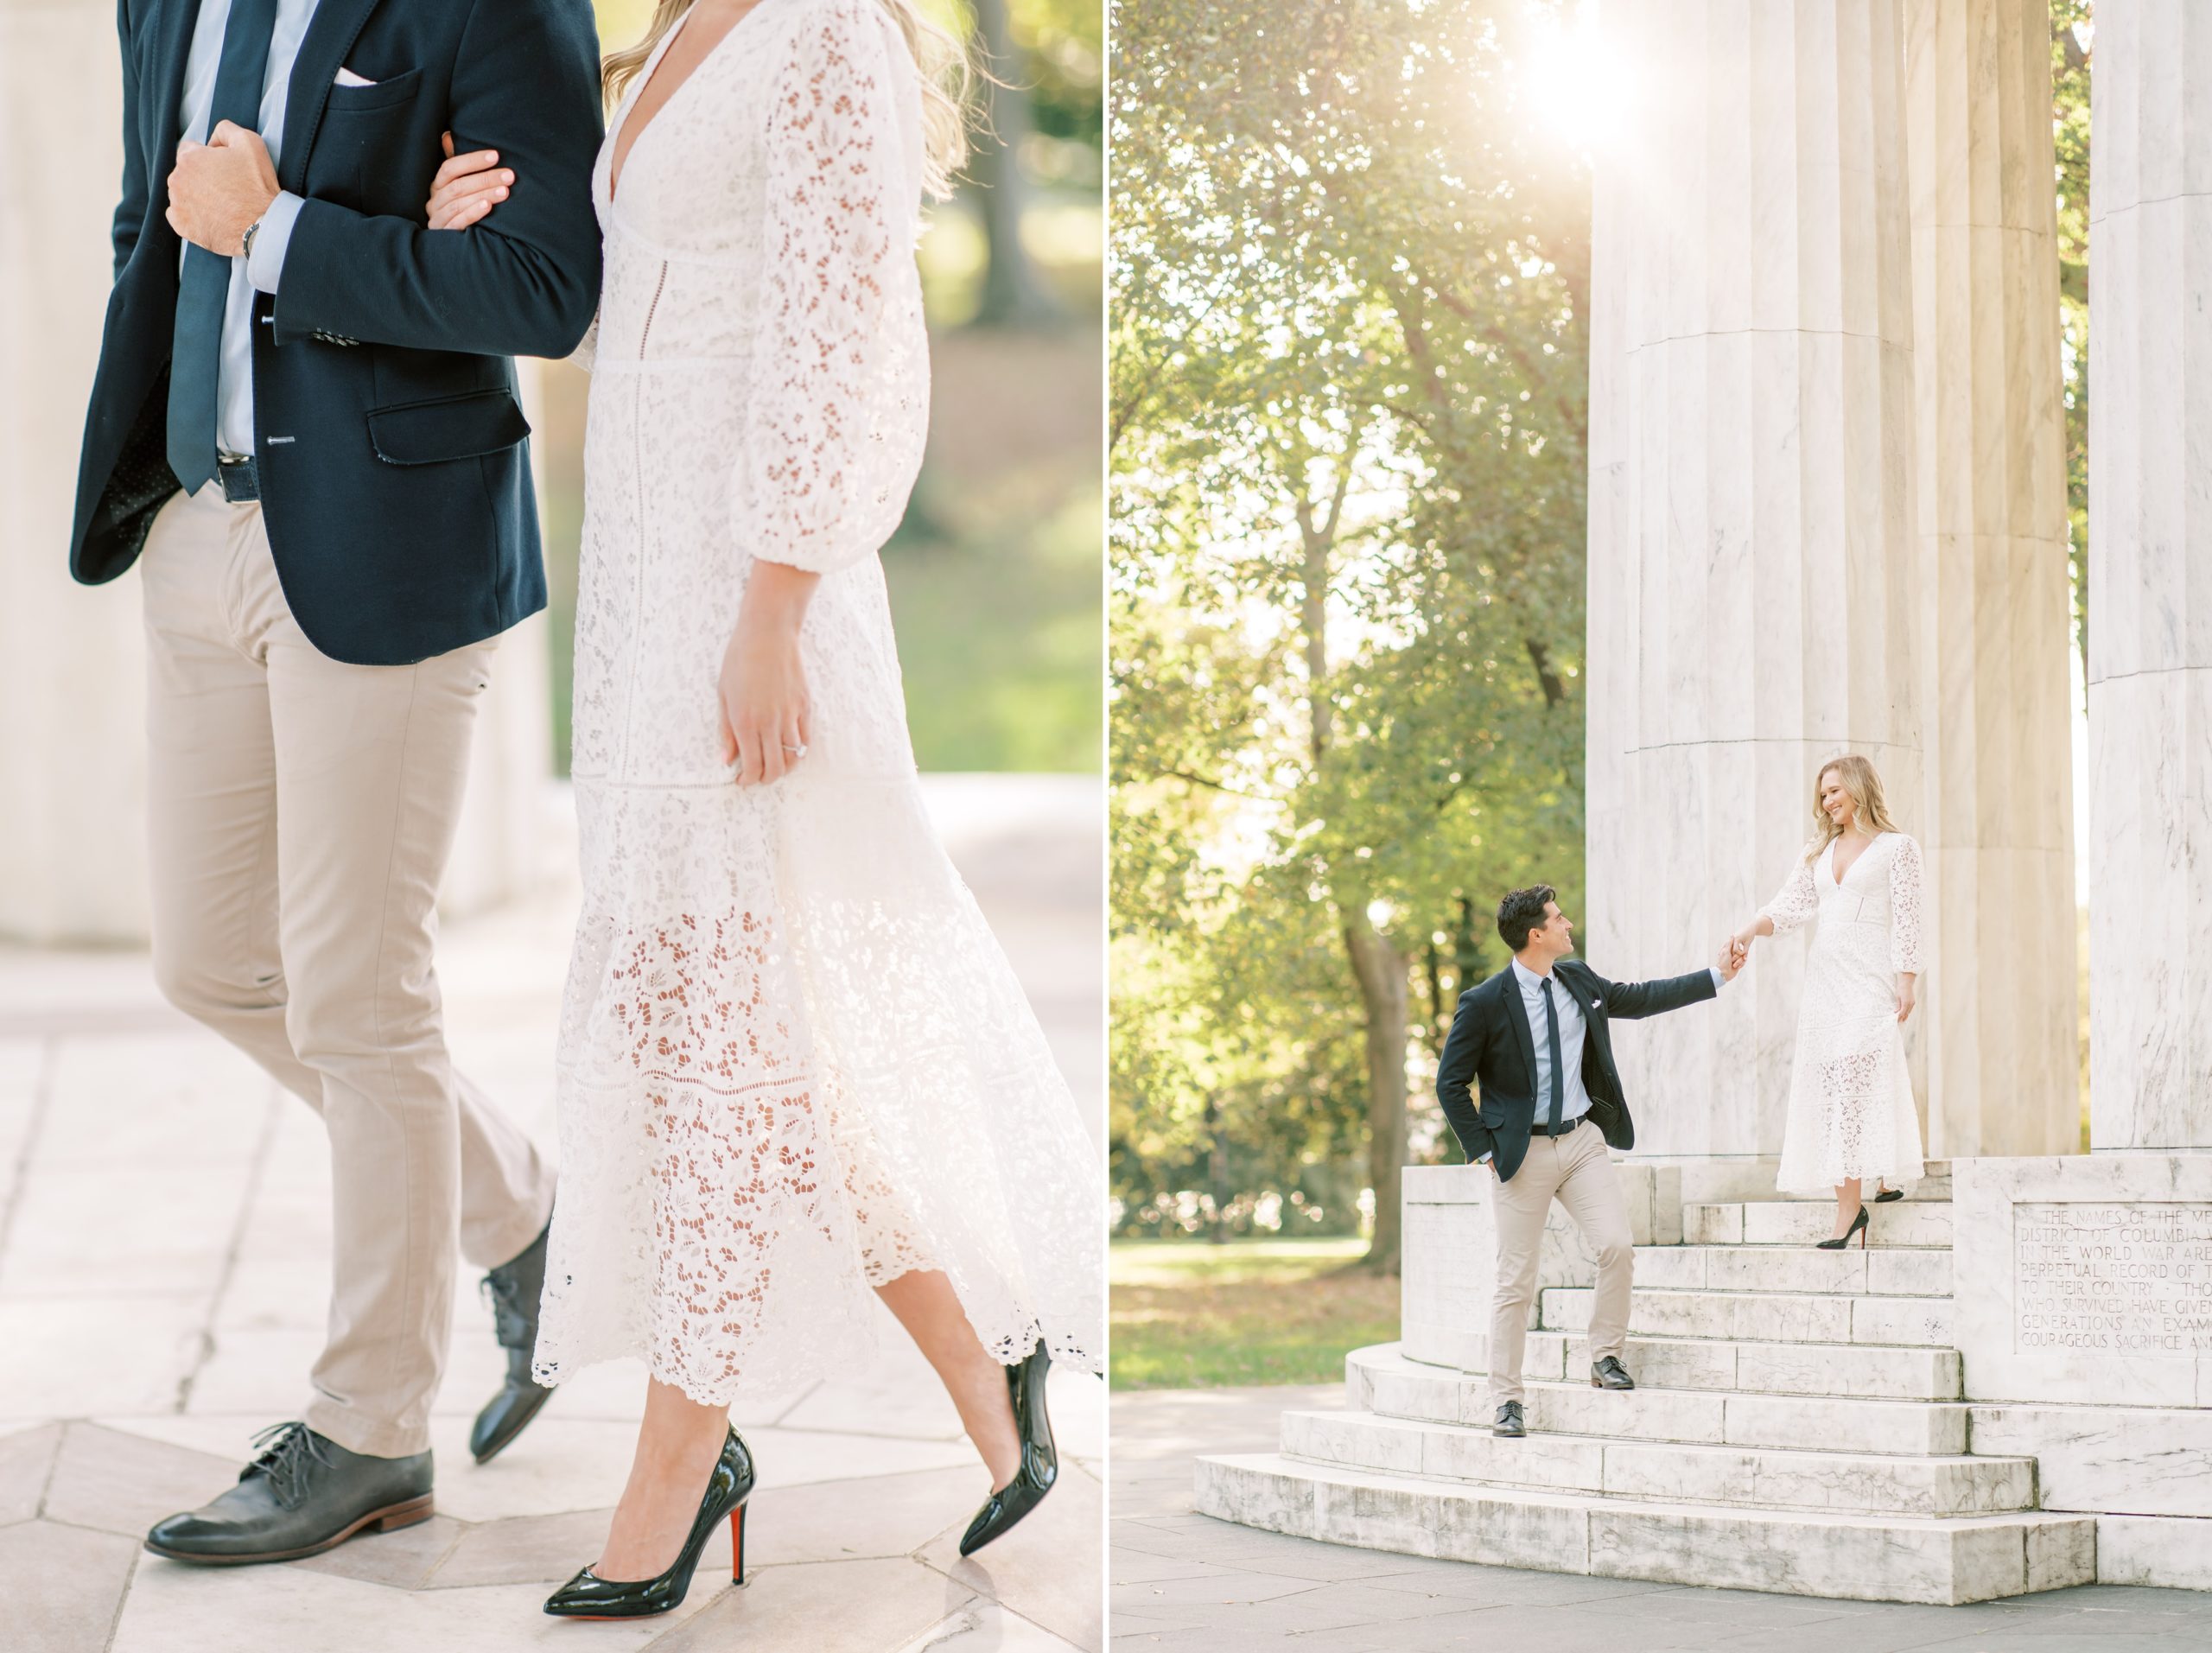 This Washington, DC wedding photographer reviews the highlights of her engagement portrait sessions from the 2020 season.